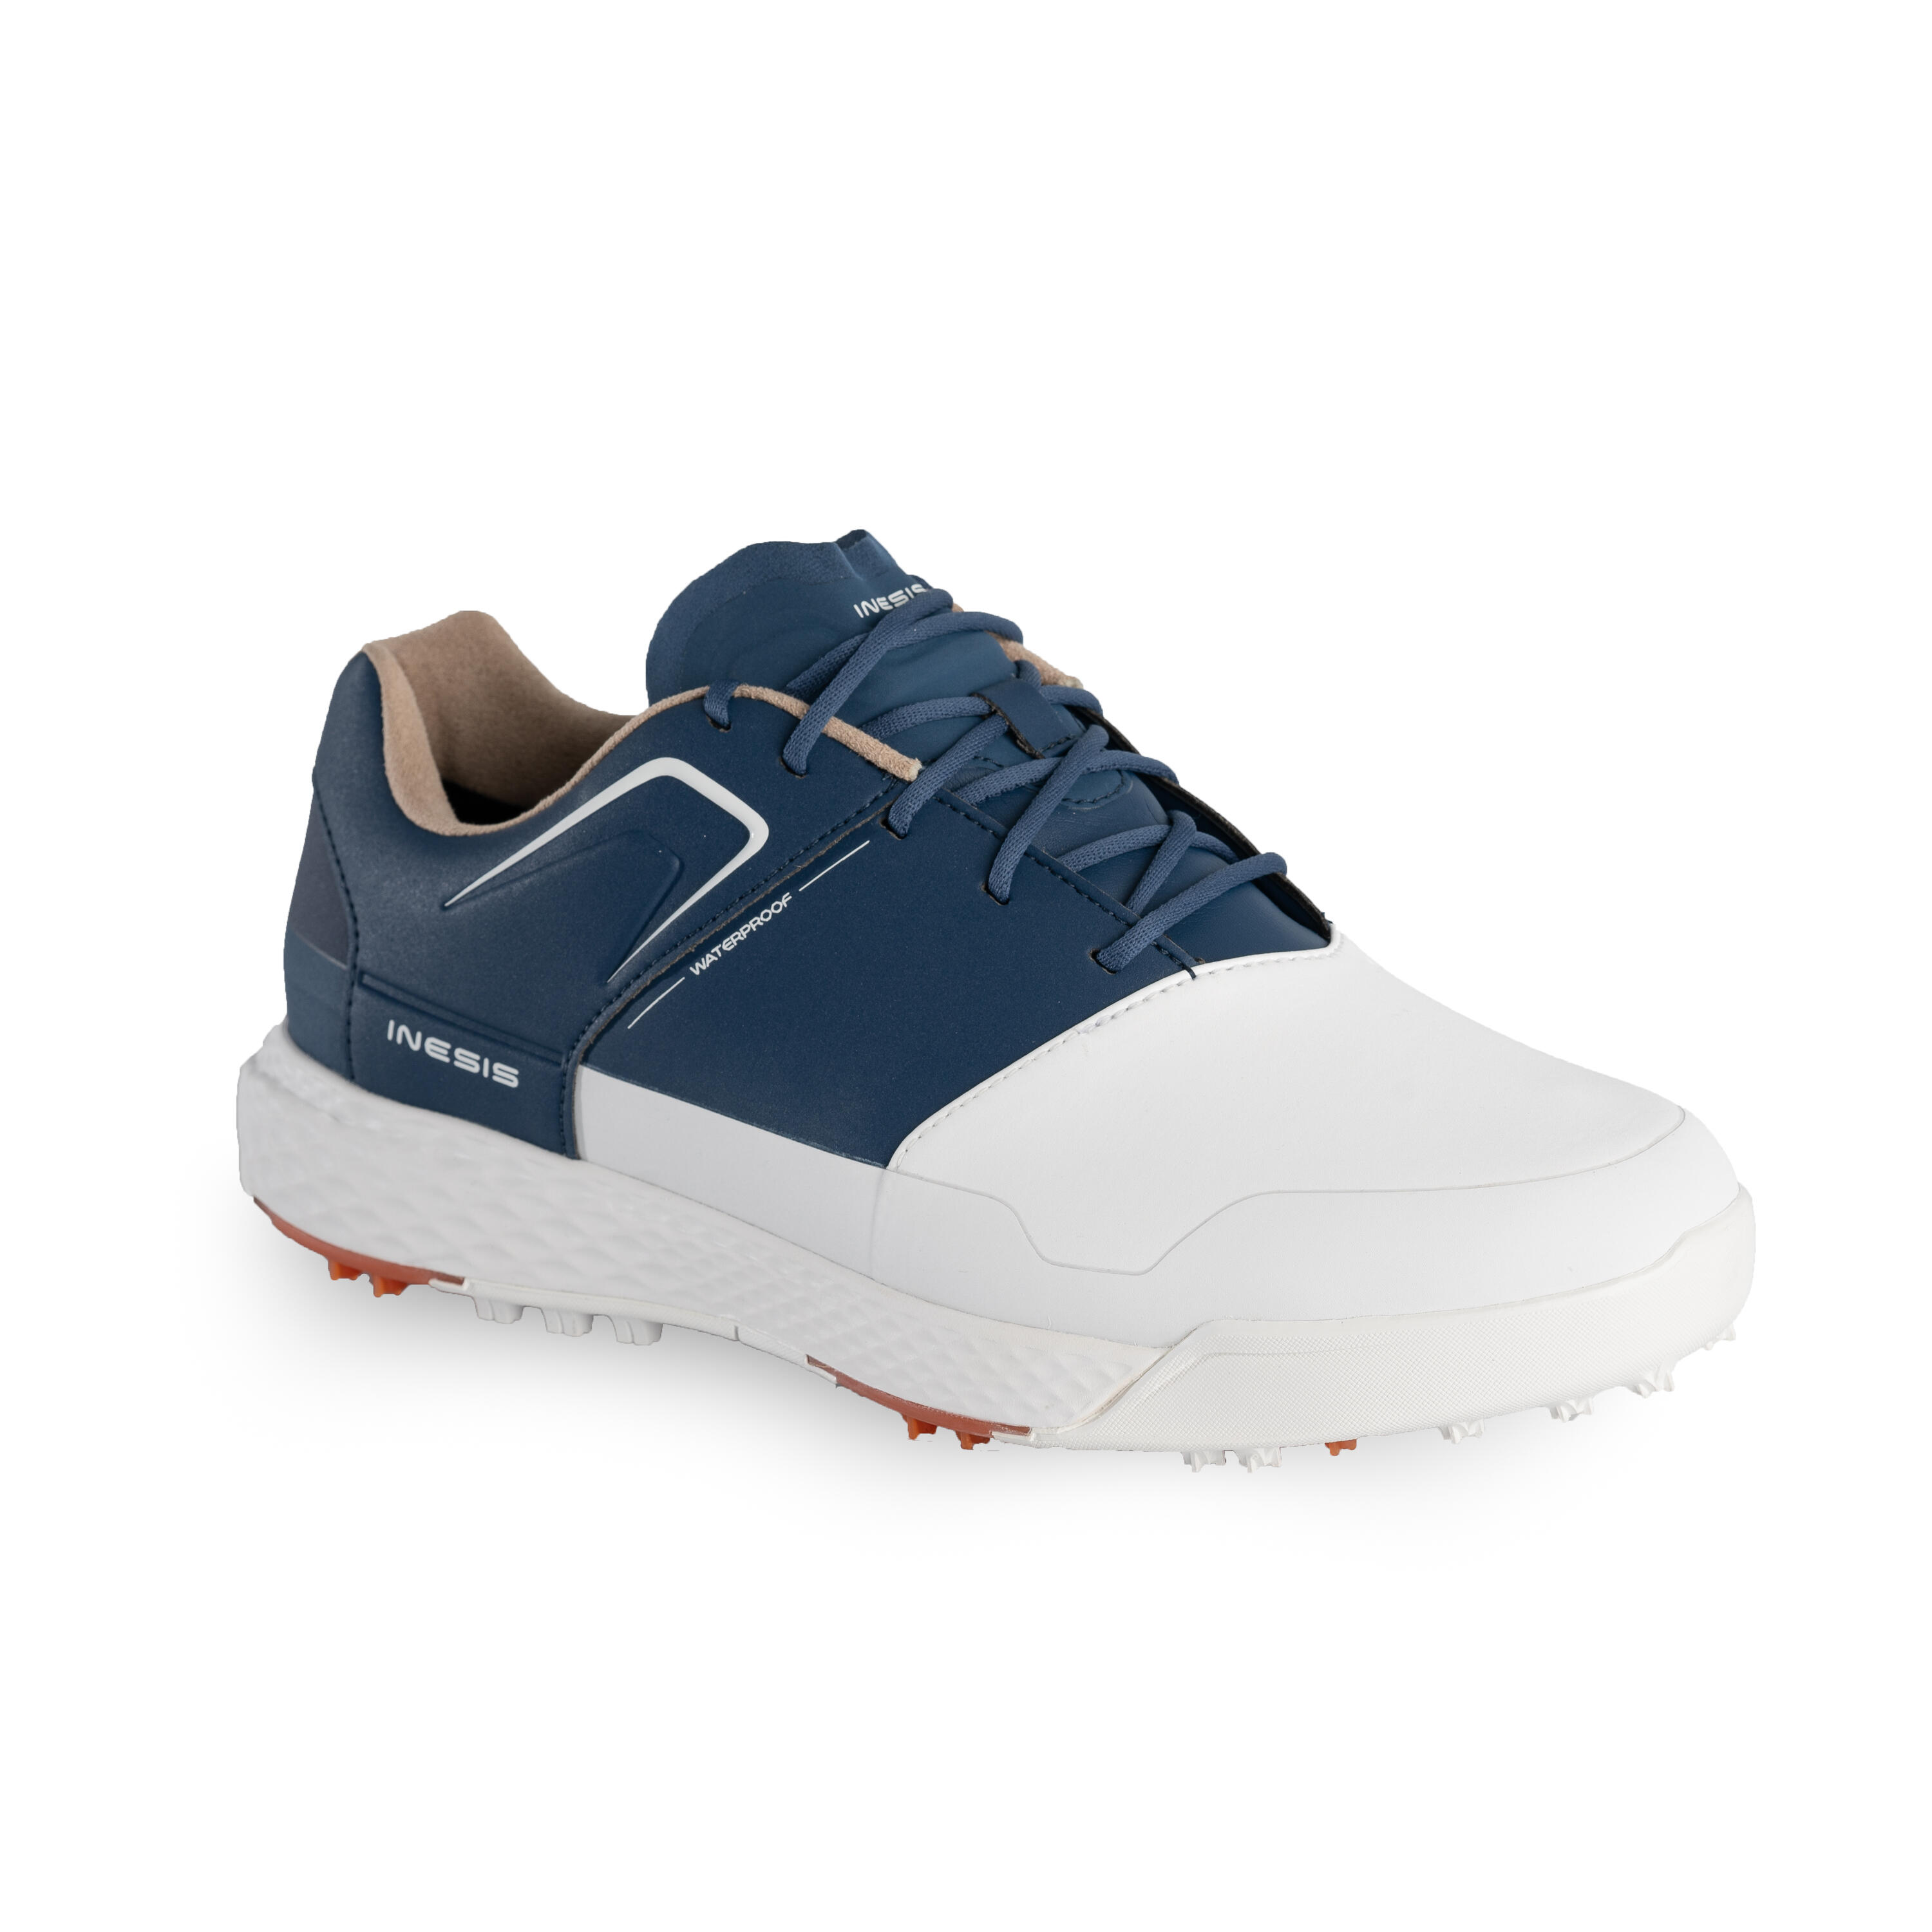 Men's golf waterproof grip shoes - white and blue 1/7